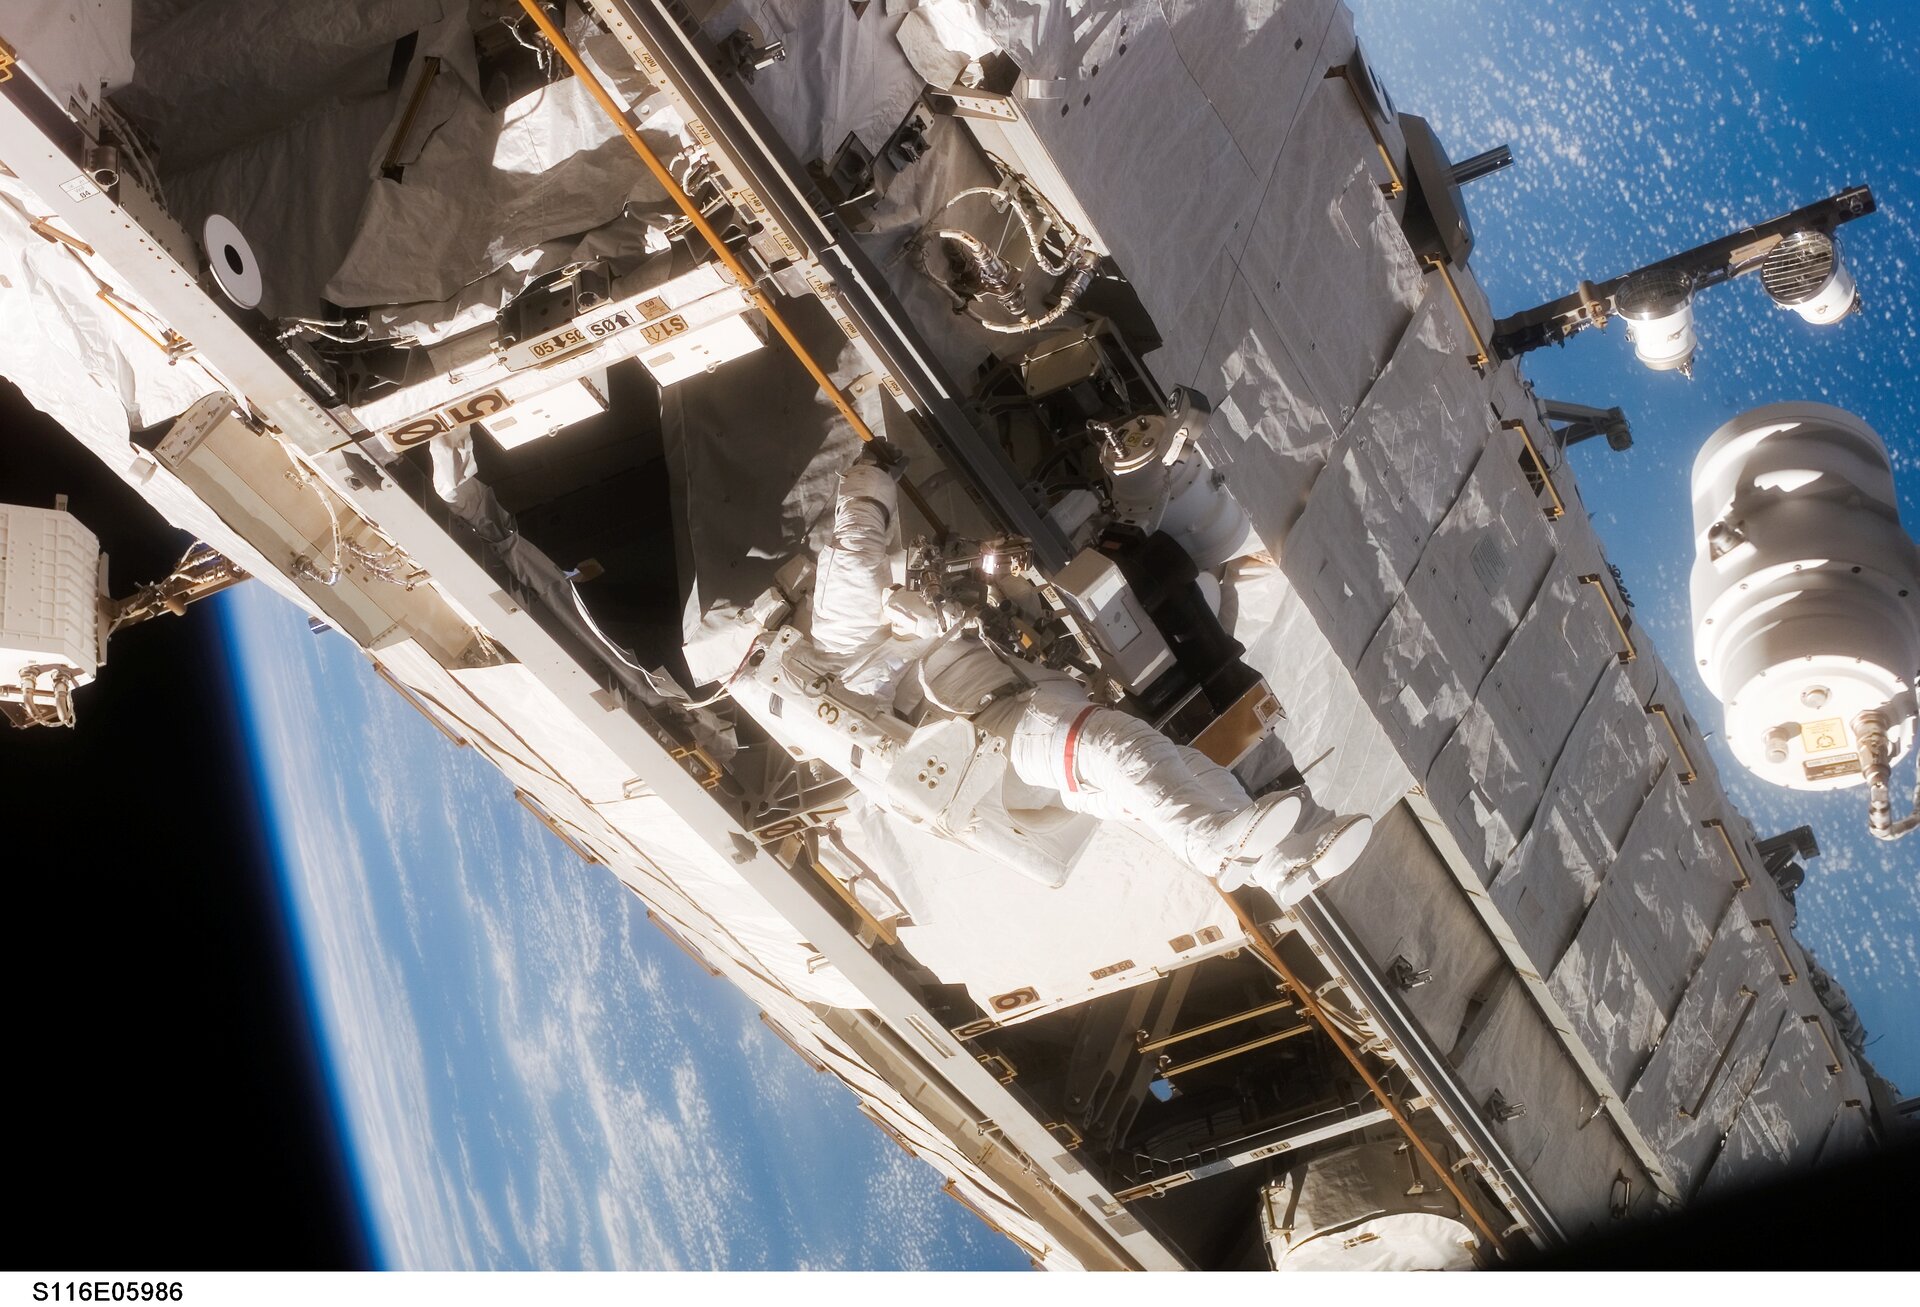 NASA astronaut Robert Curbeam during the first spacewalk of the STS-116 mission